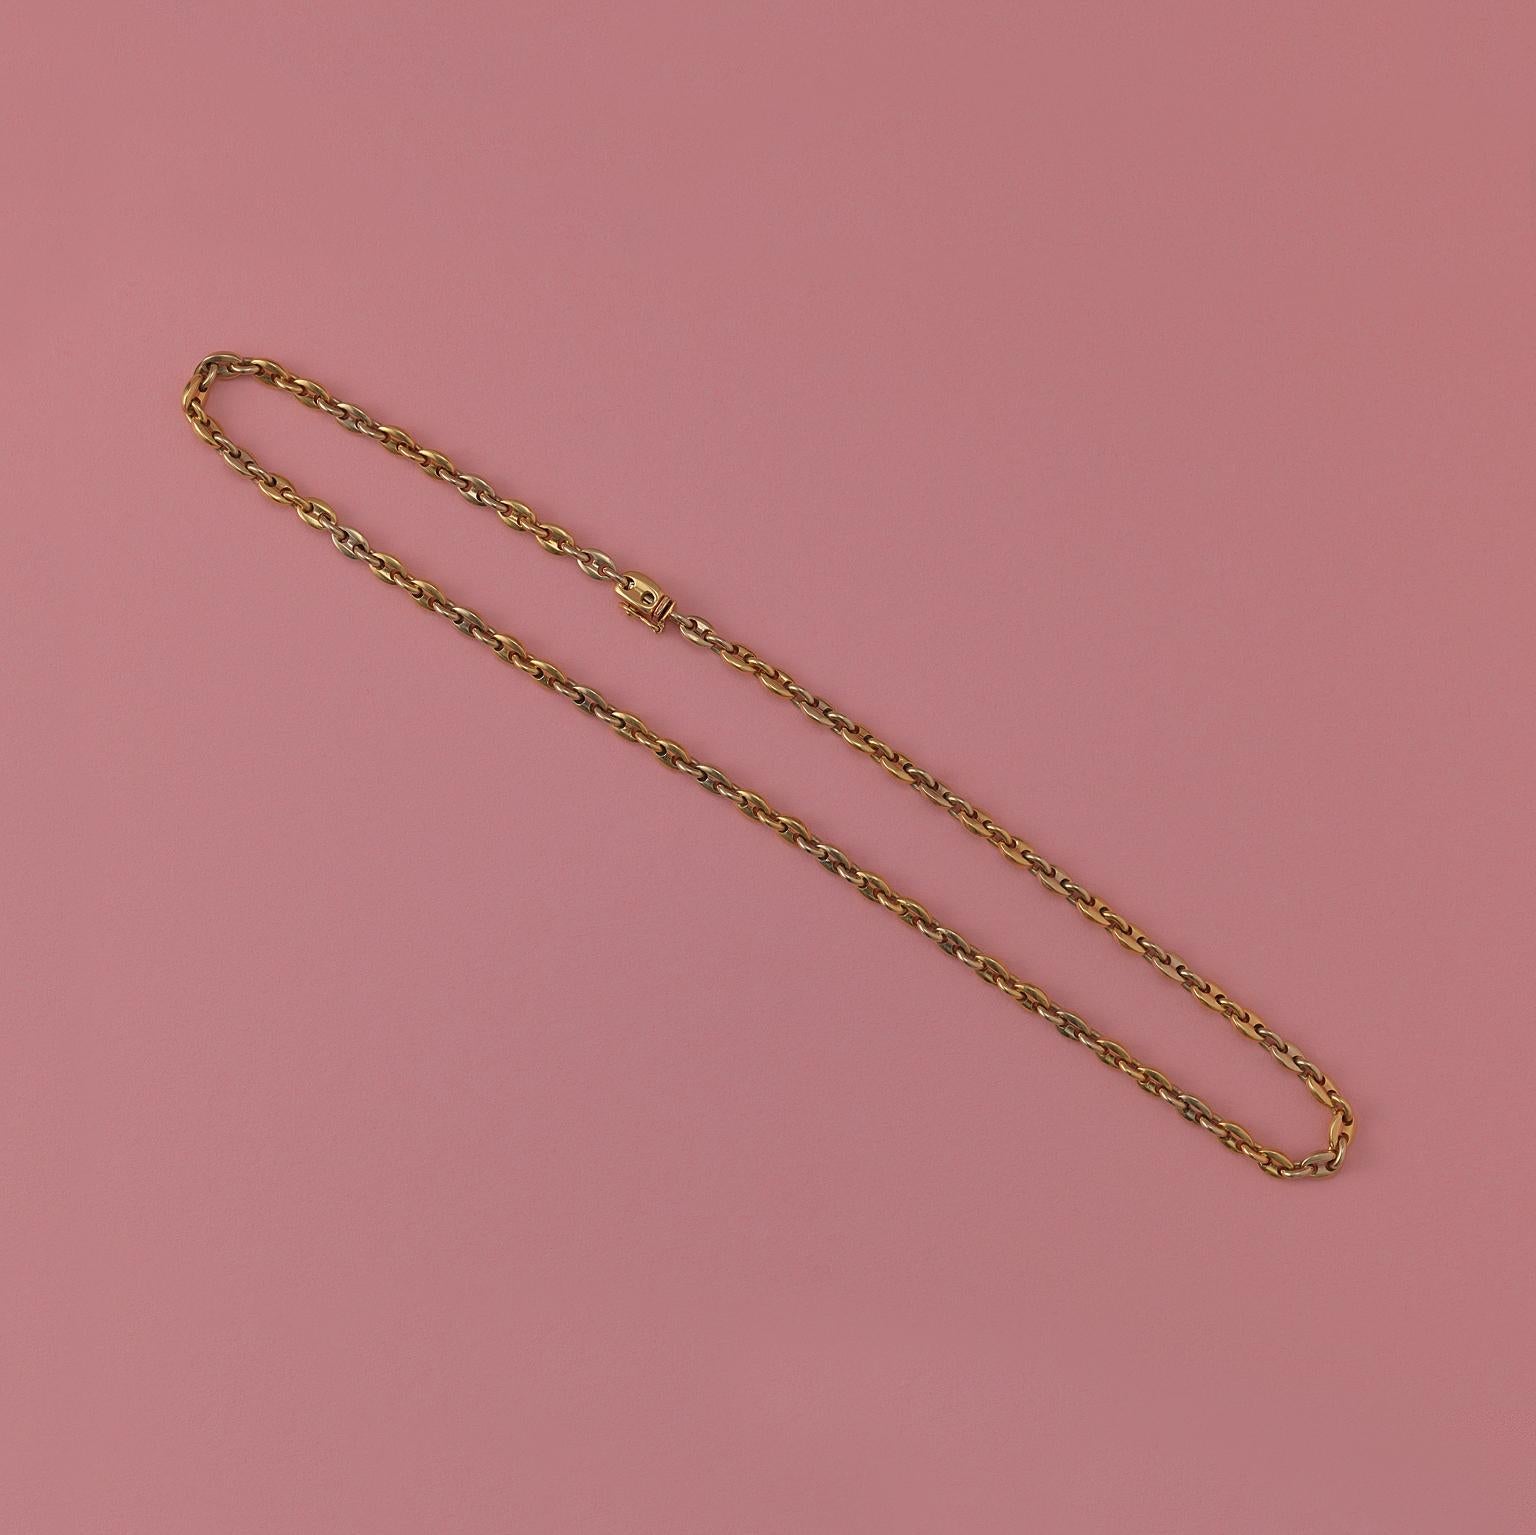 A vintage bi-color 18 carat gold coffee bean chain, signed and numbered: Cartier, 709927.

length: 45.5 cm
weight: 39.91 grams
width: 5 mm